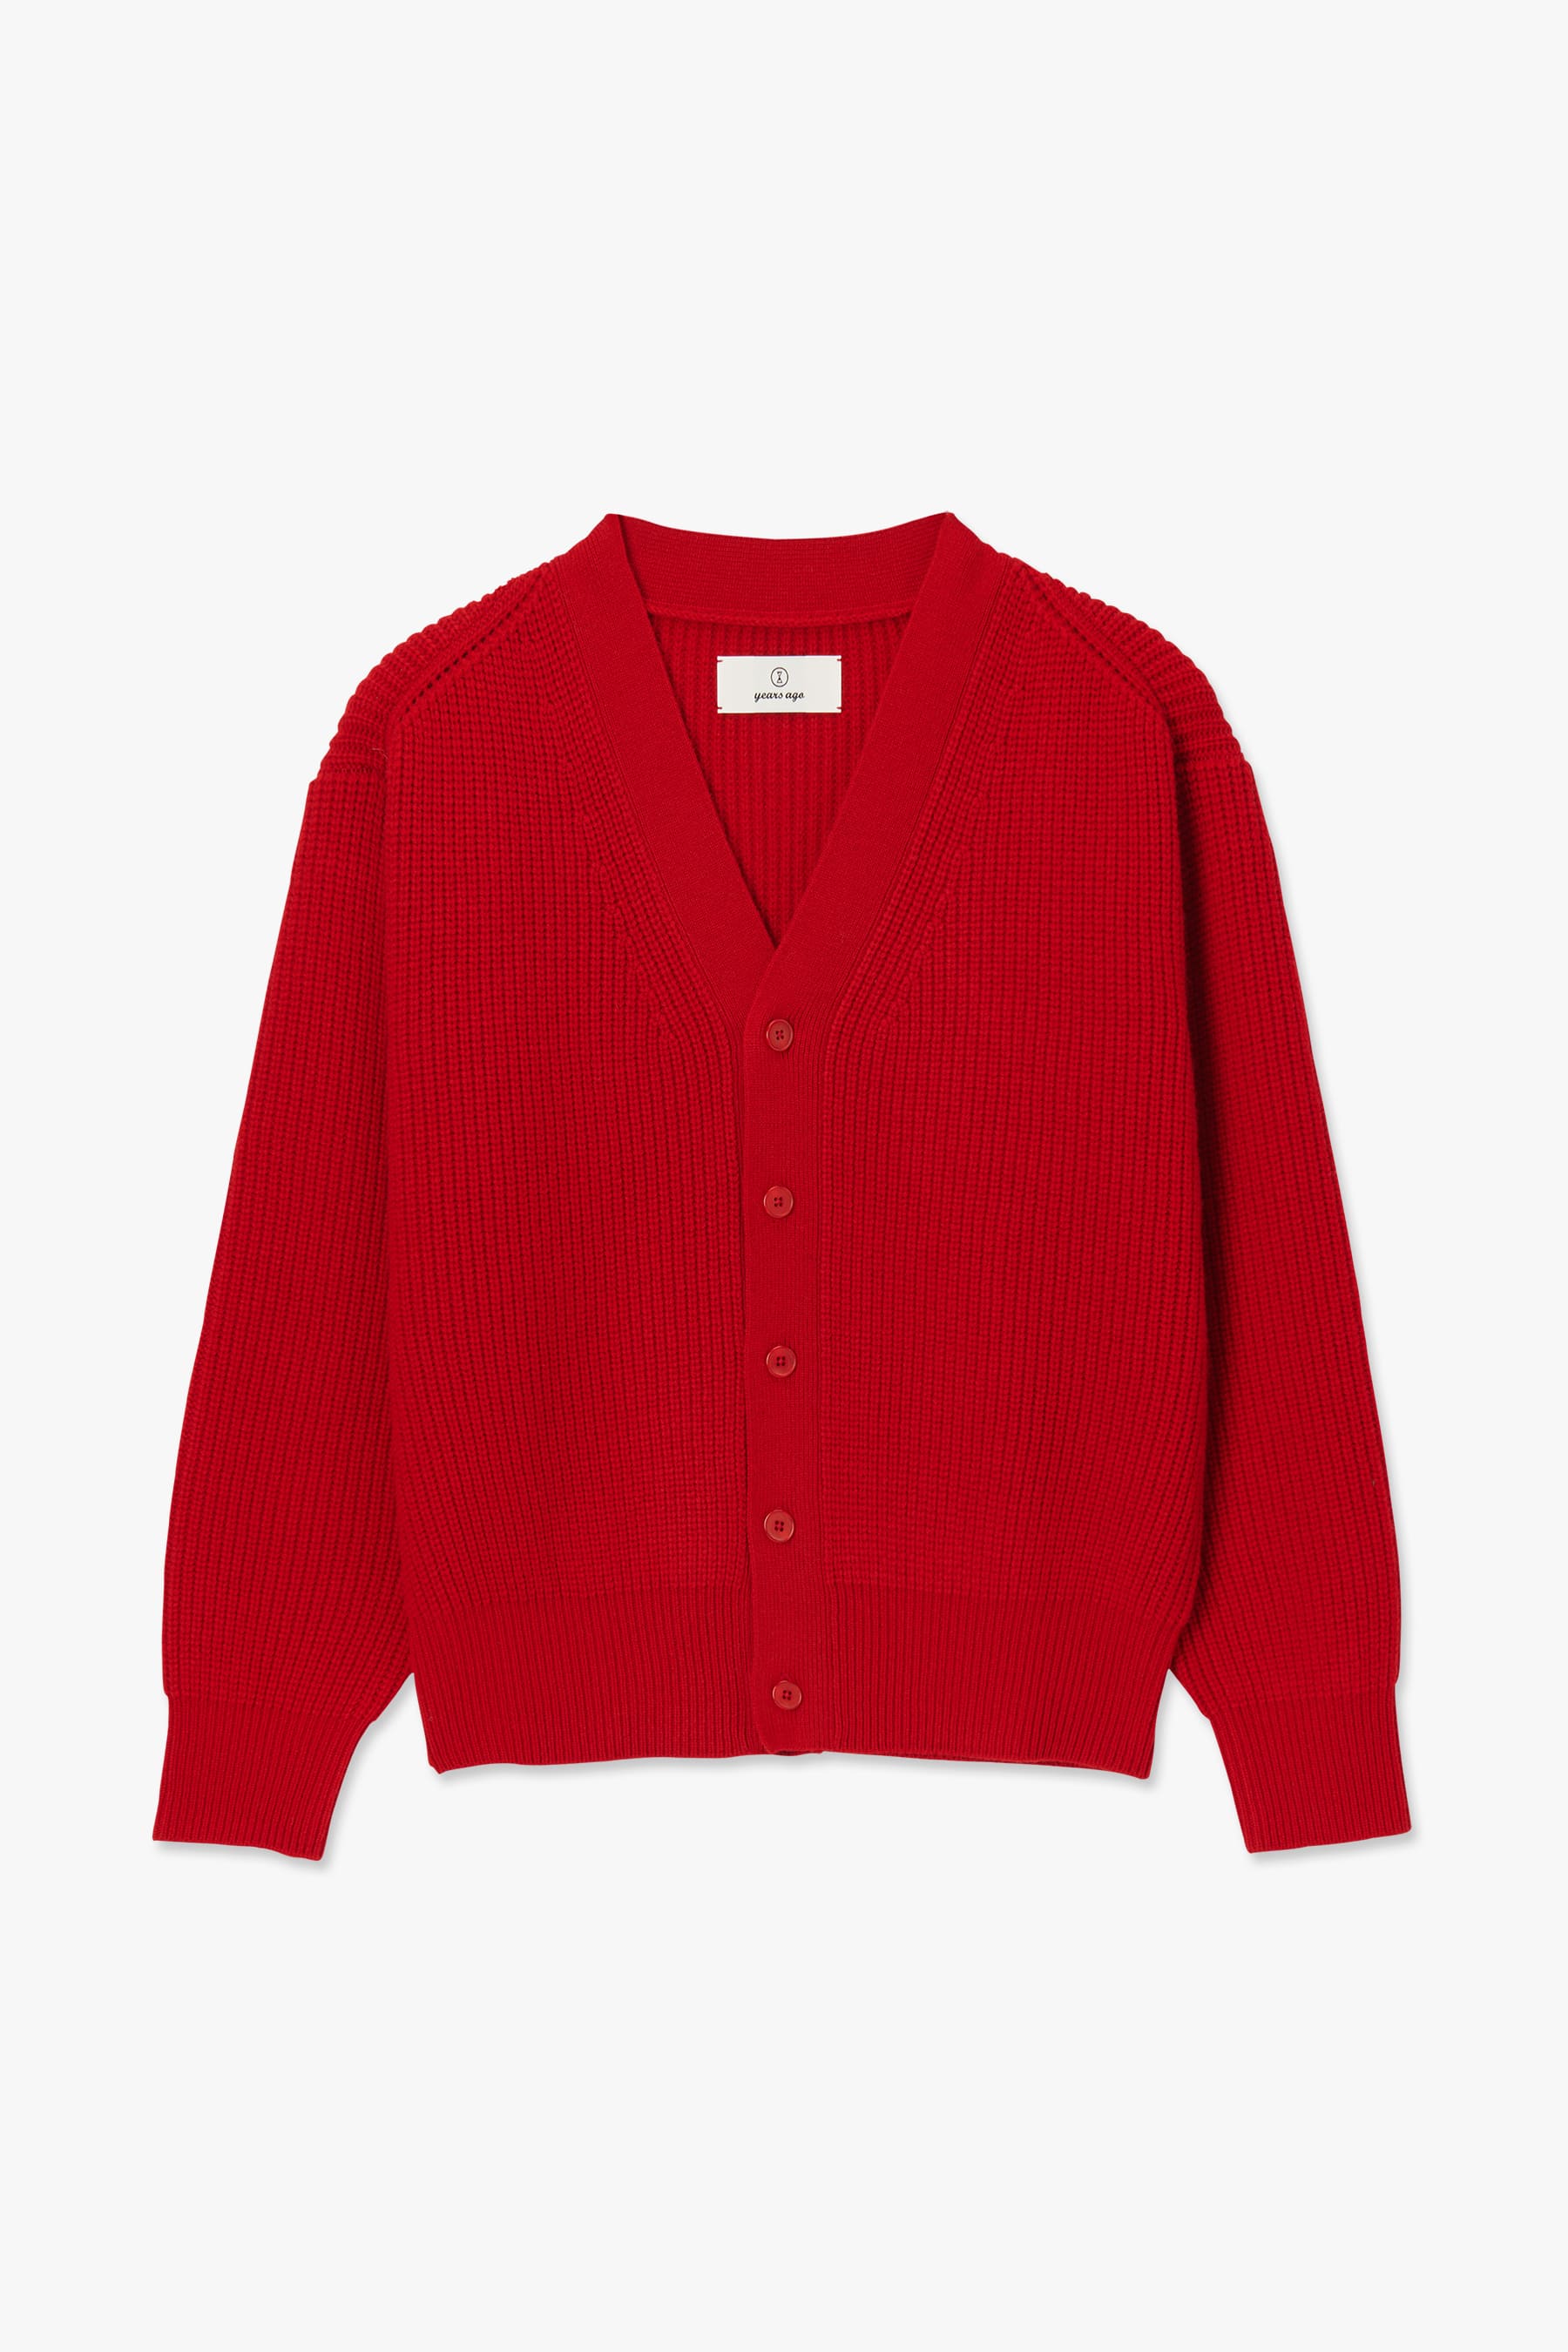 RED ROVER WOOL CARDIGAN 01-2